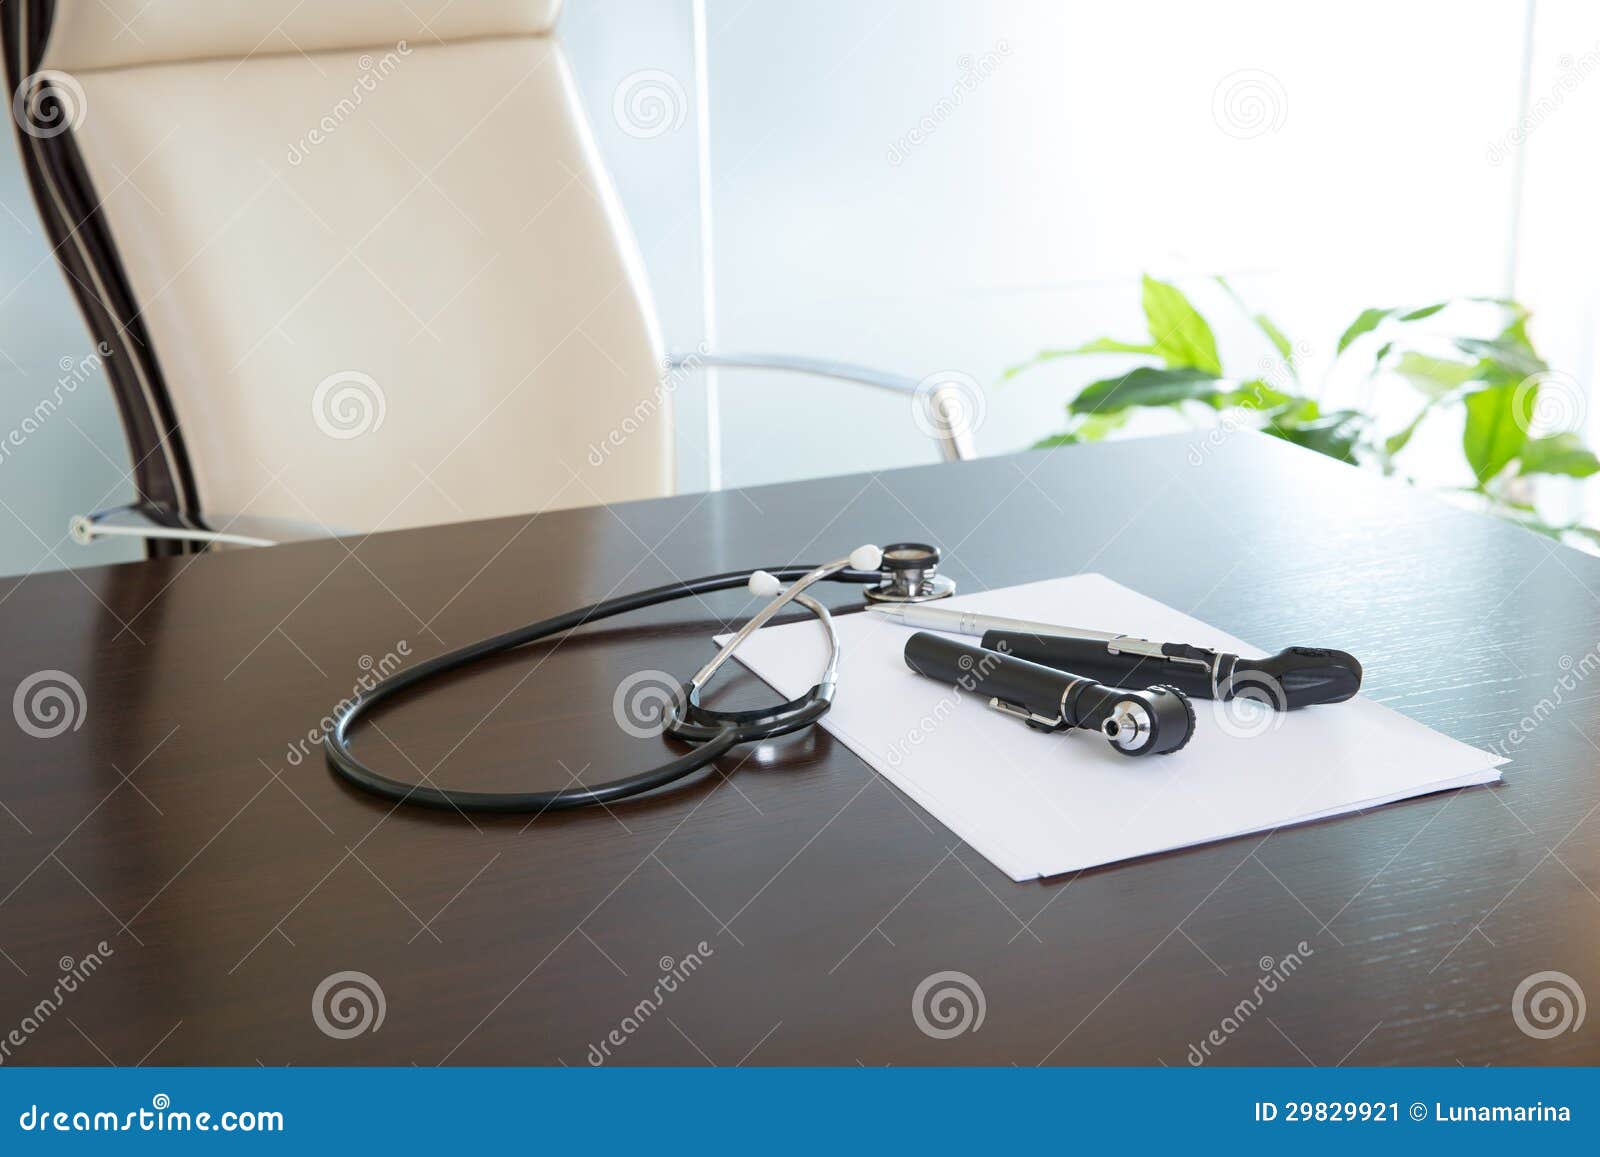 Doctor Office Table Desk With Stethoscope And Otoscope Stock Image